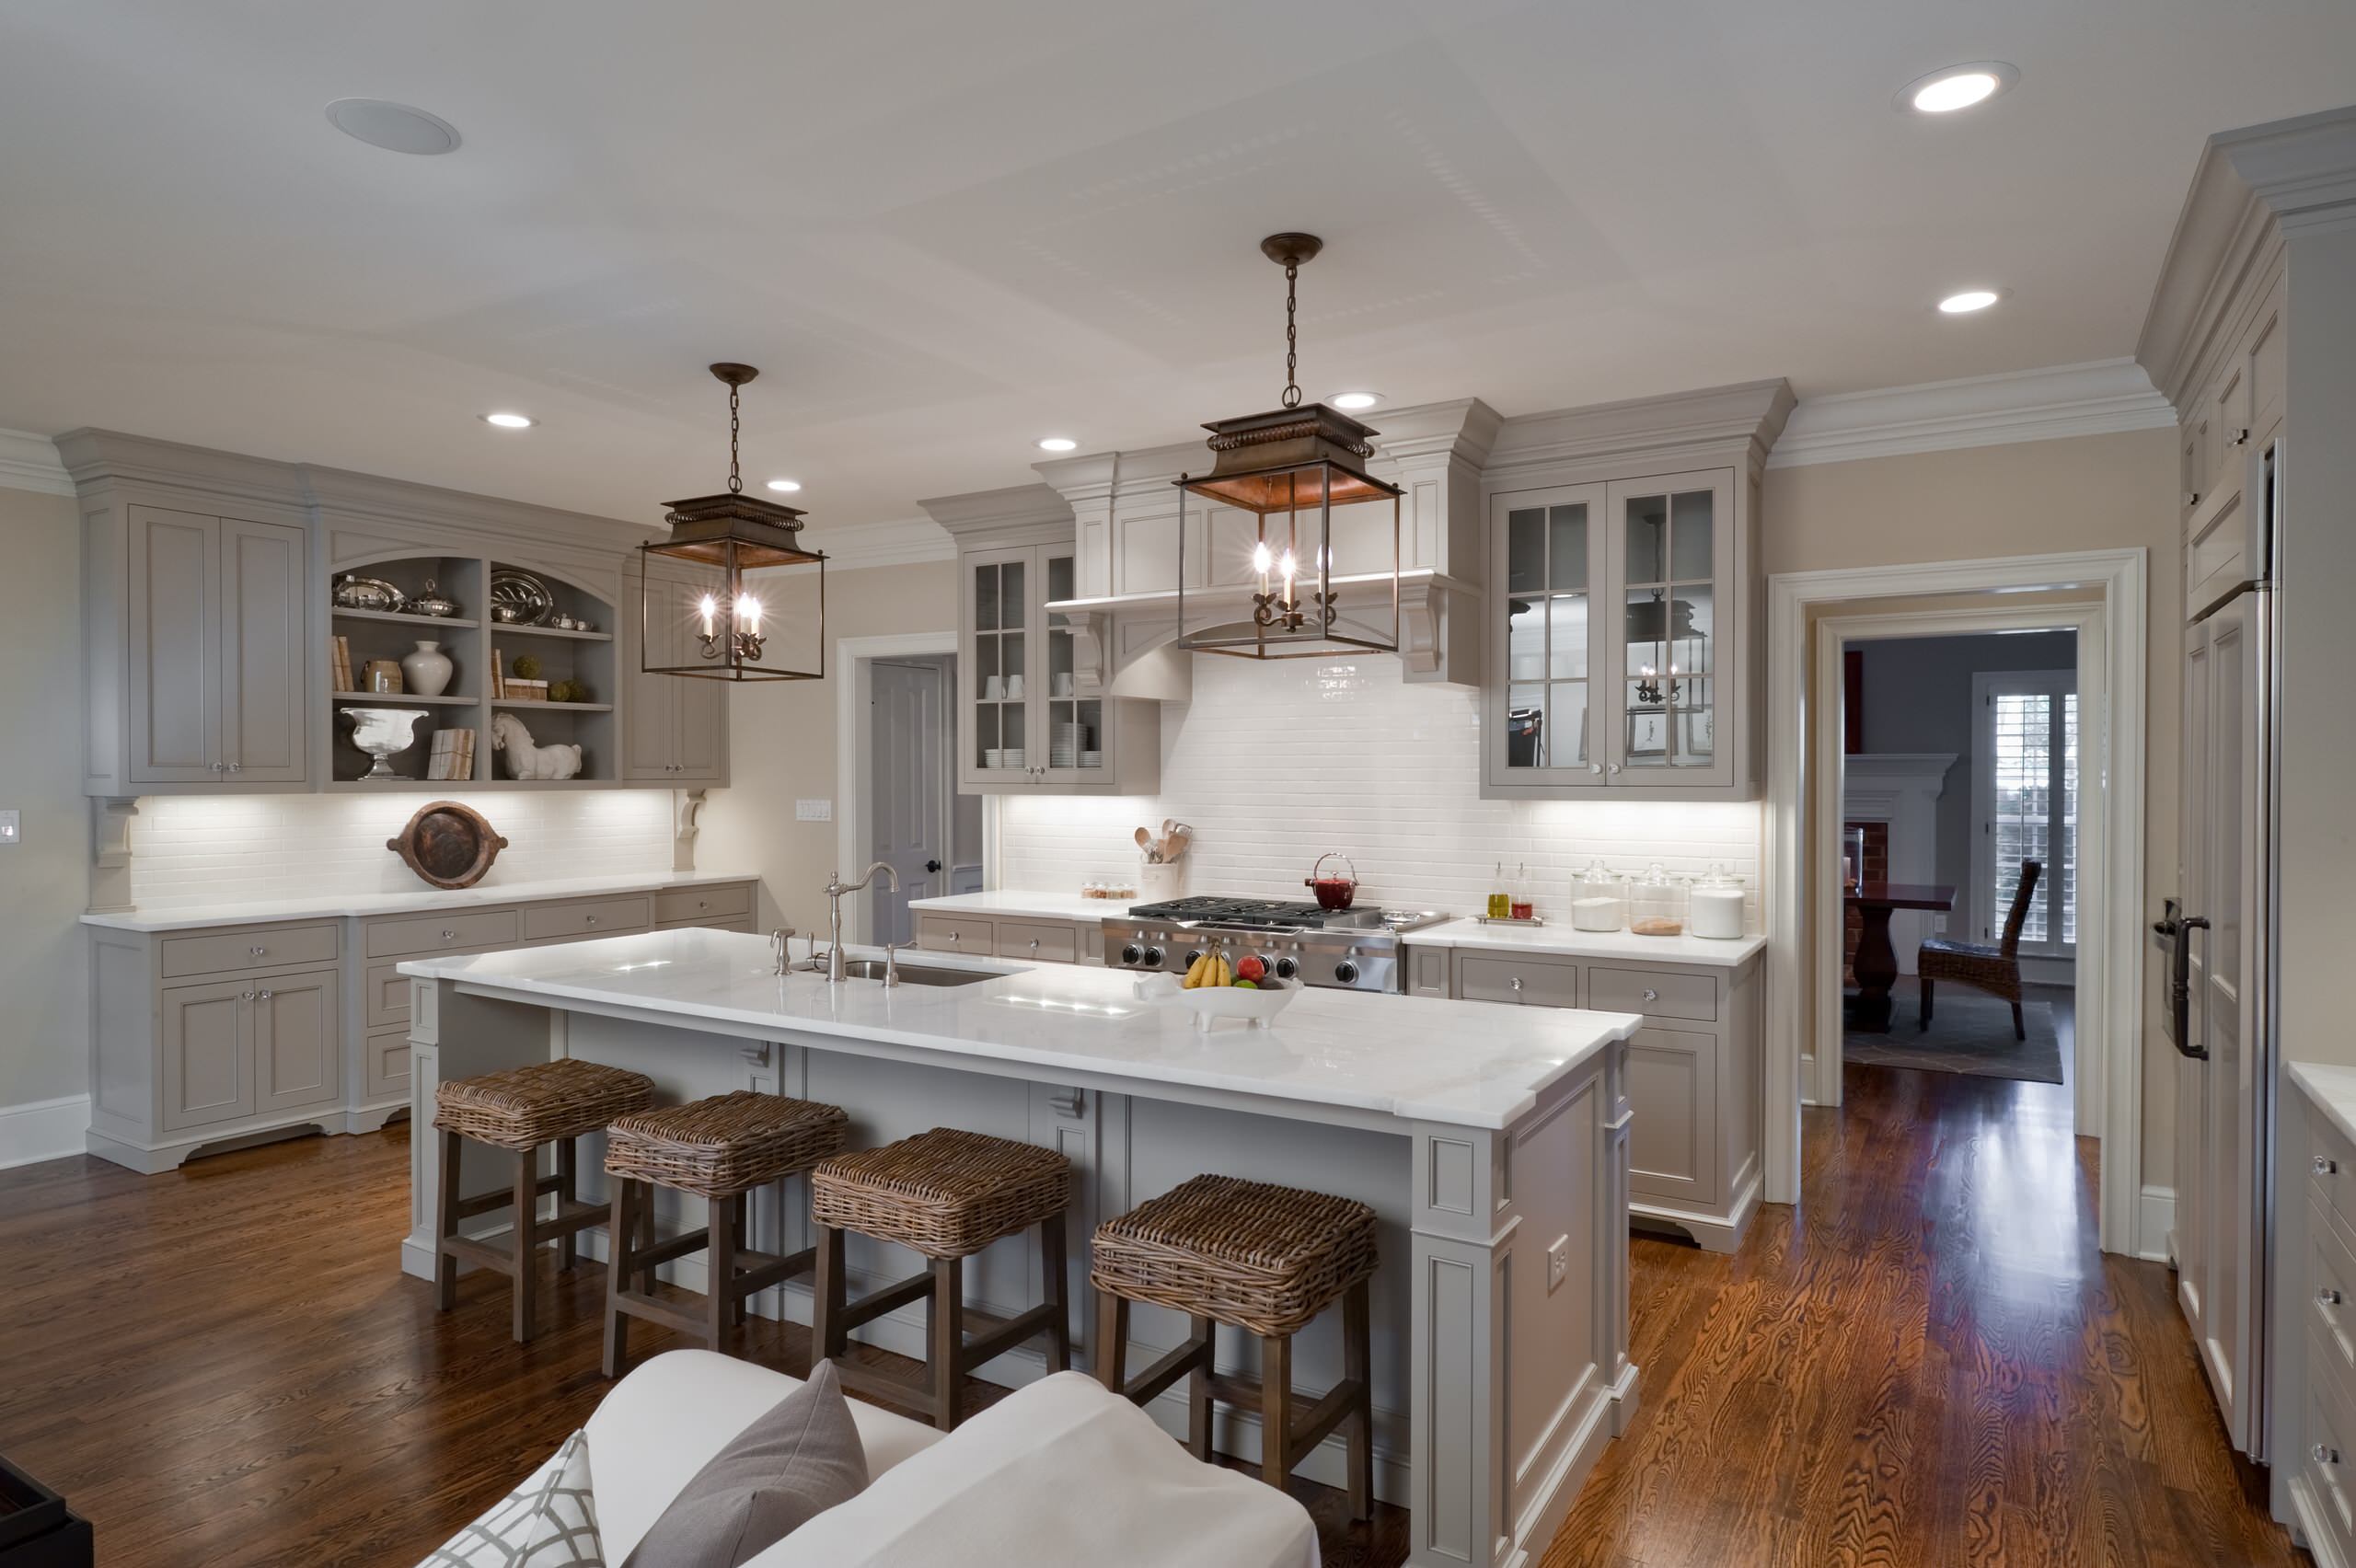 75 Gray Kitchen Ideas You'Ll Love - May, 2023 | Houzz